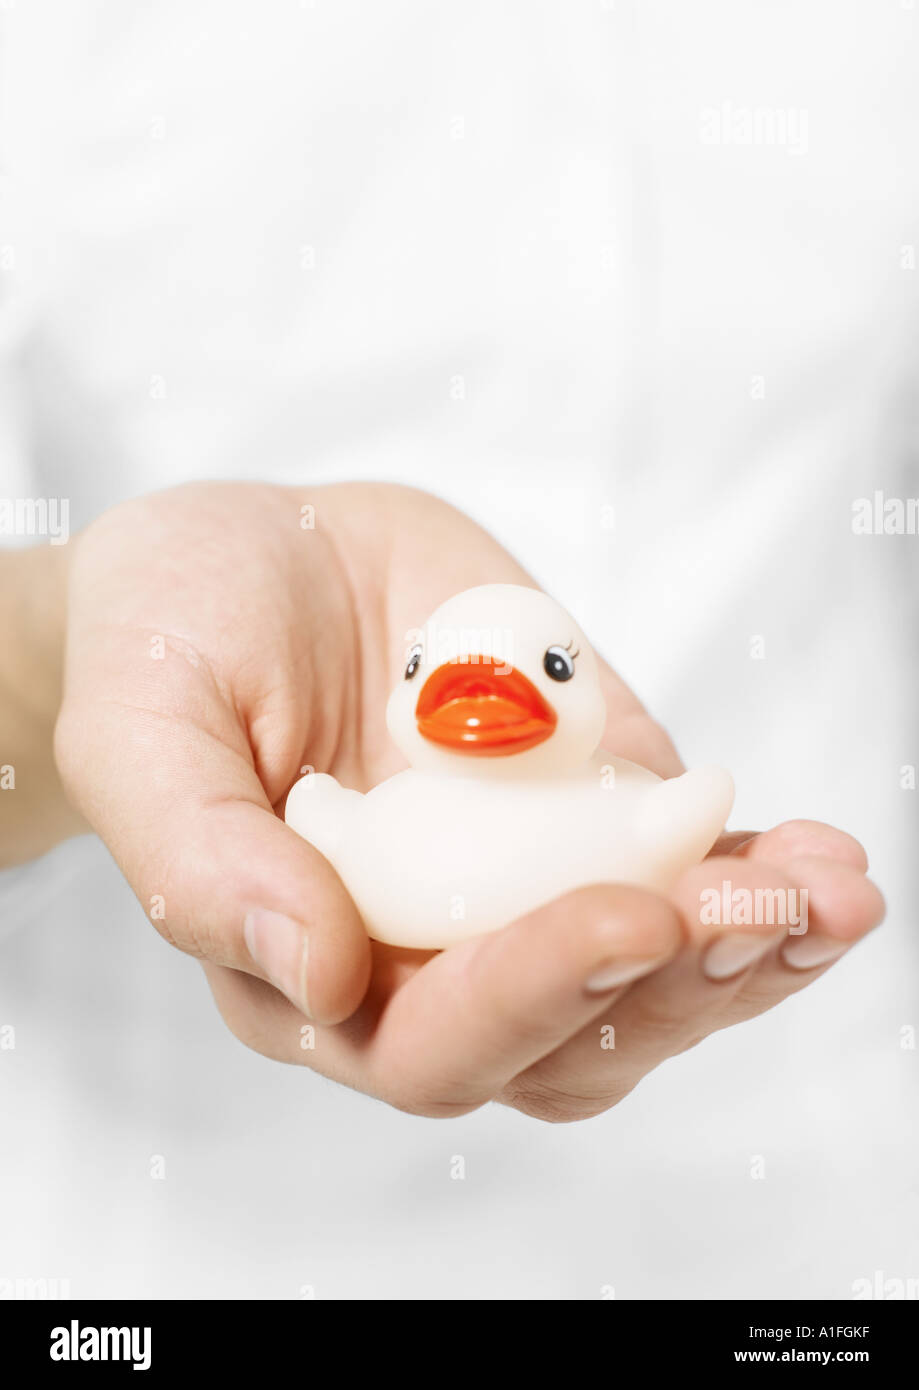 Hand holding rubber duck Stock Photo